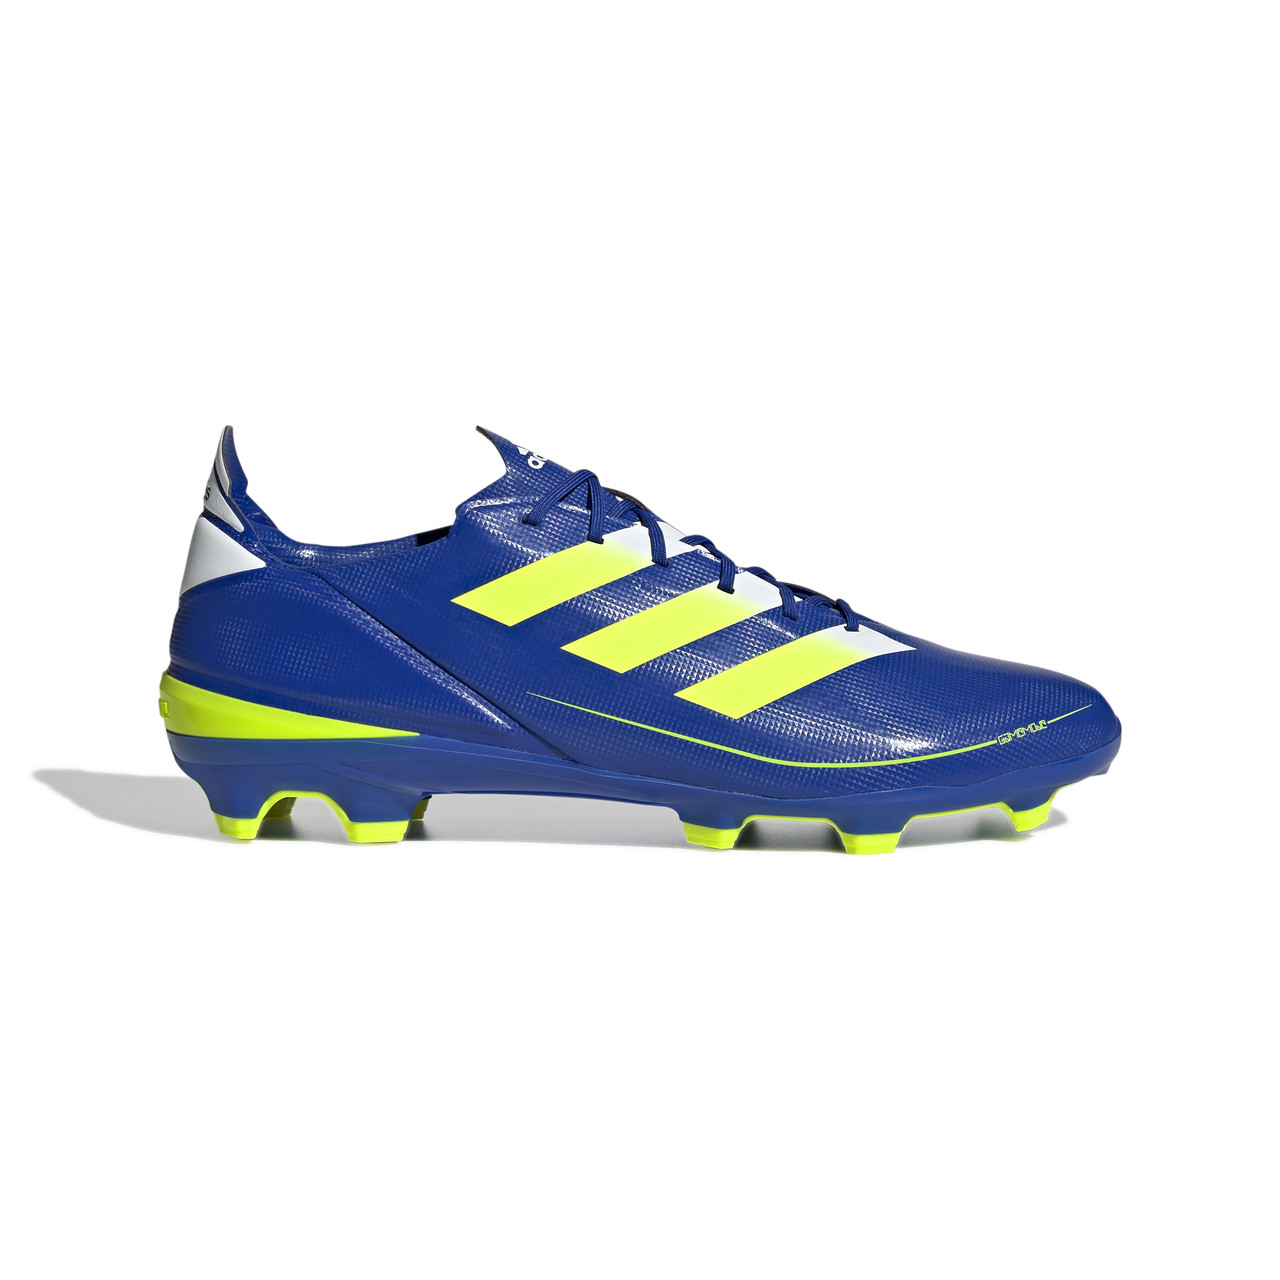 adidas Gamemode Firm Ground Soccer Cleats Royal Blue - Chicago Soccer